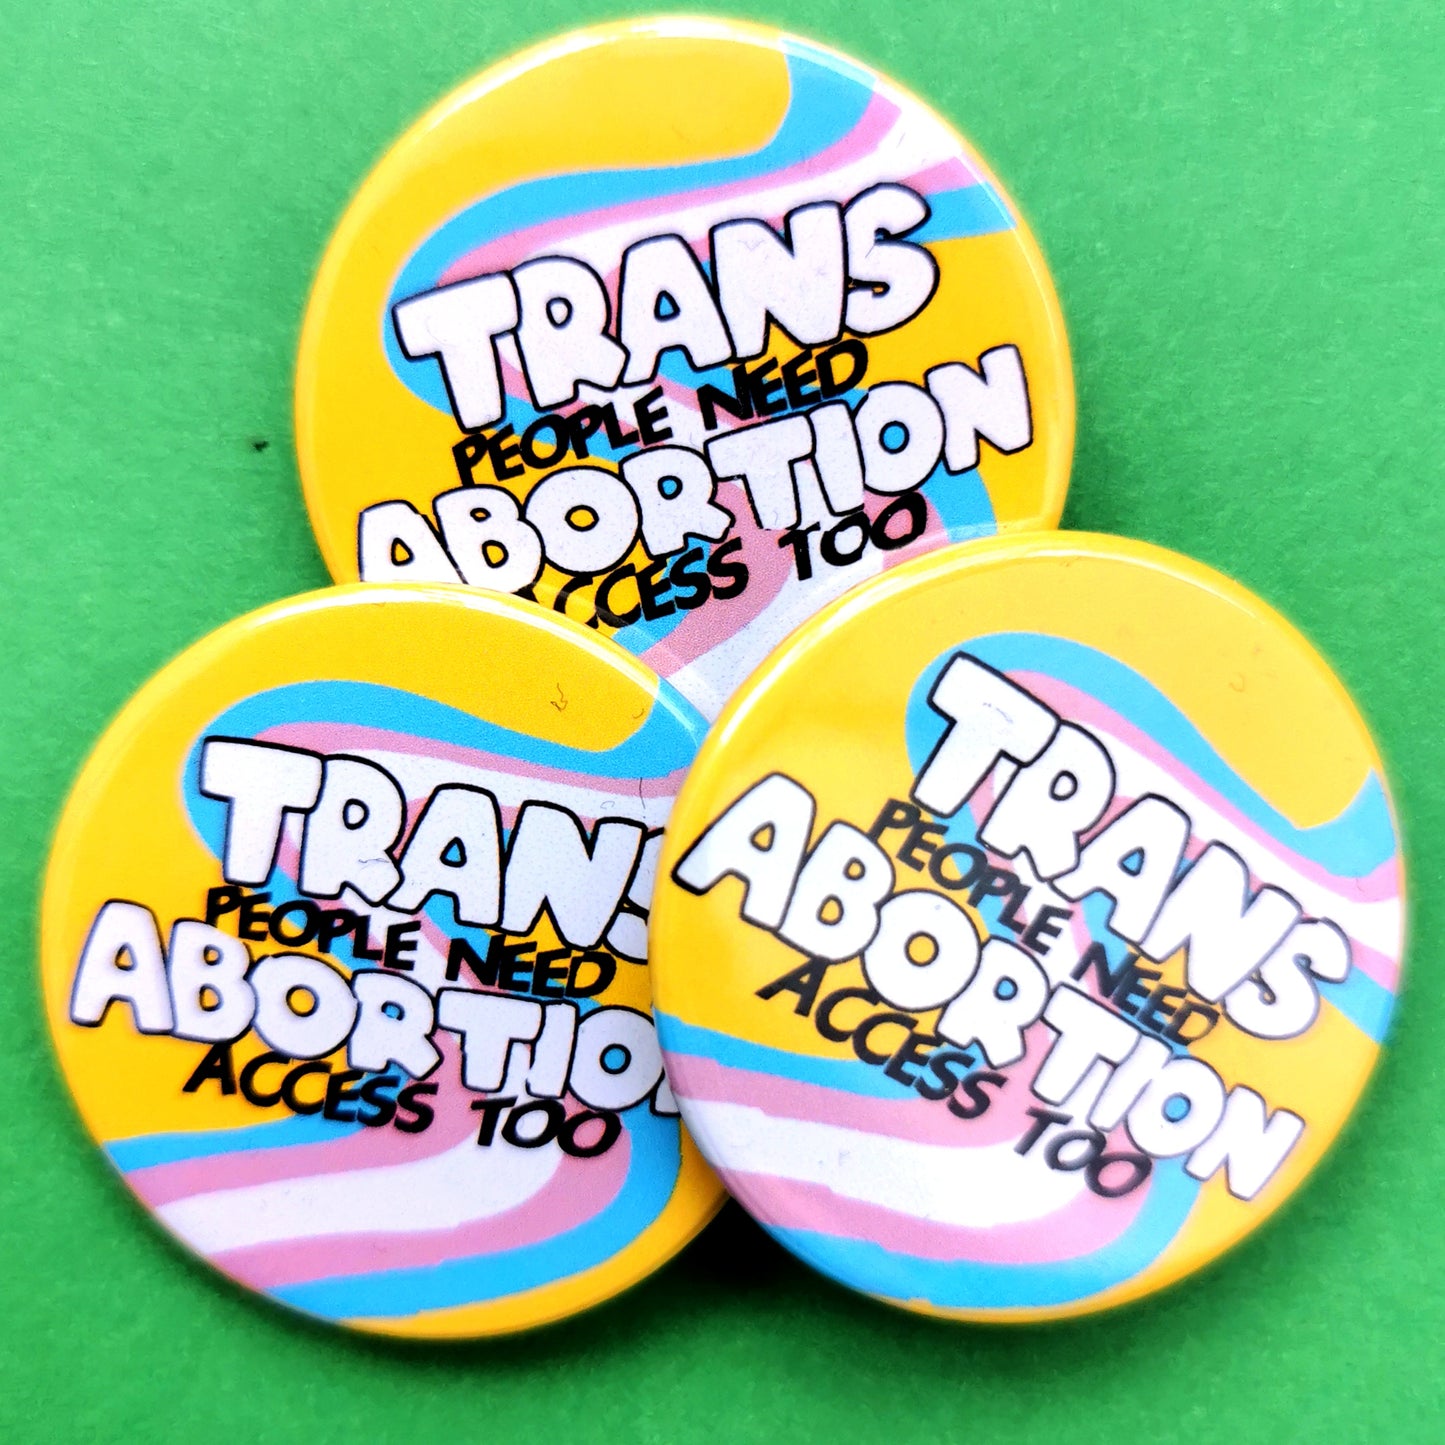 Trans People Need Abortion Access Too badge